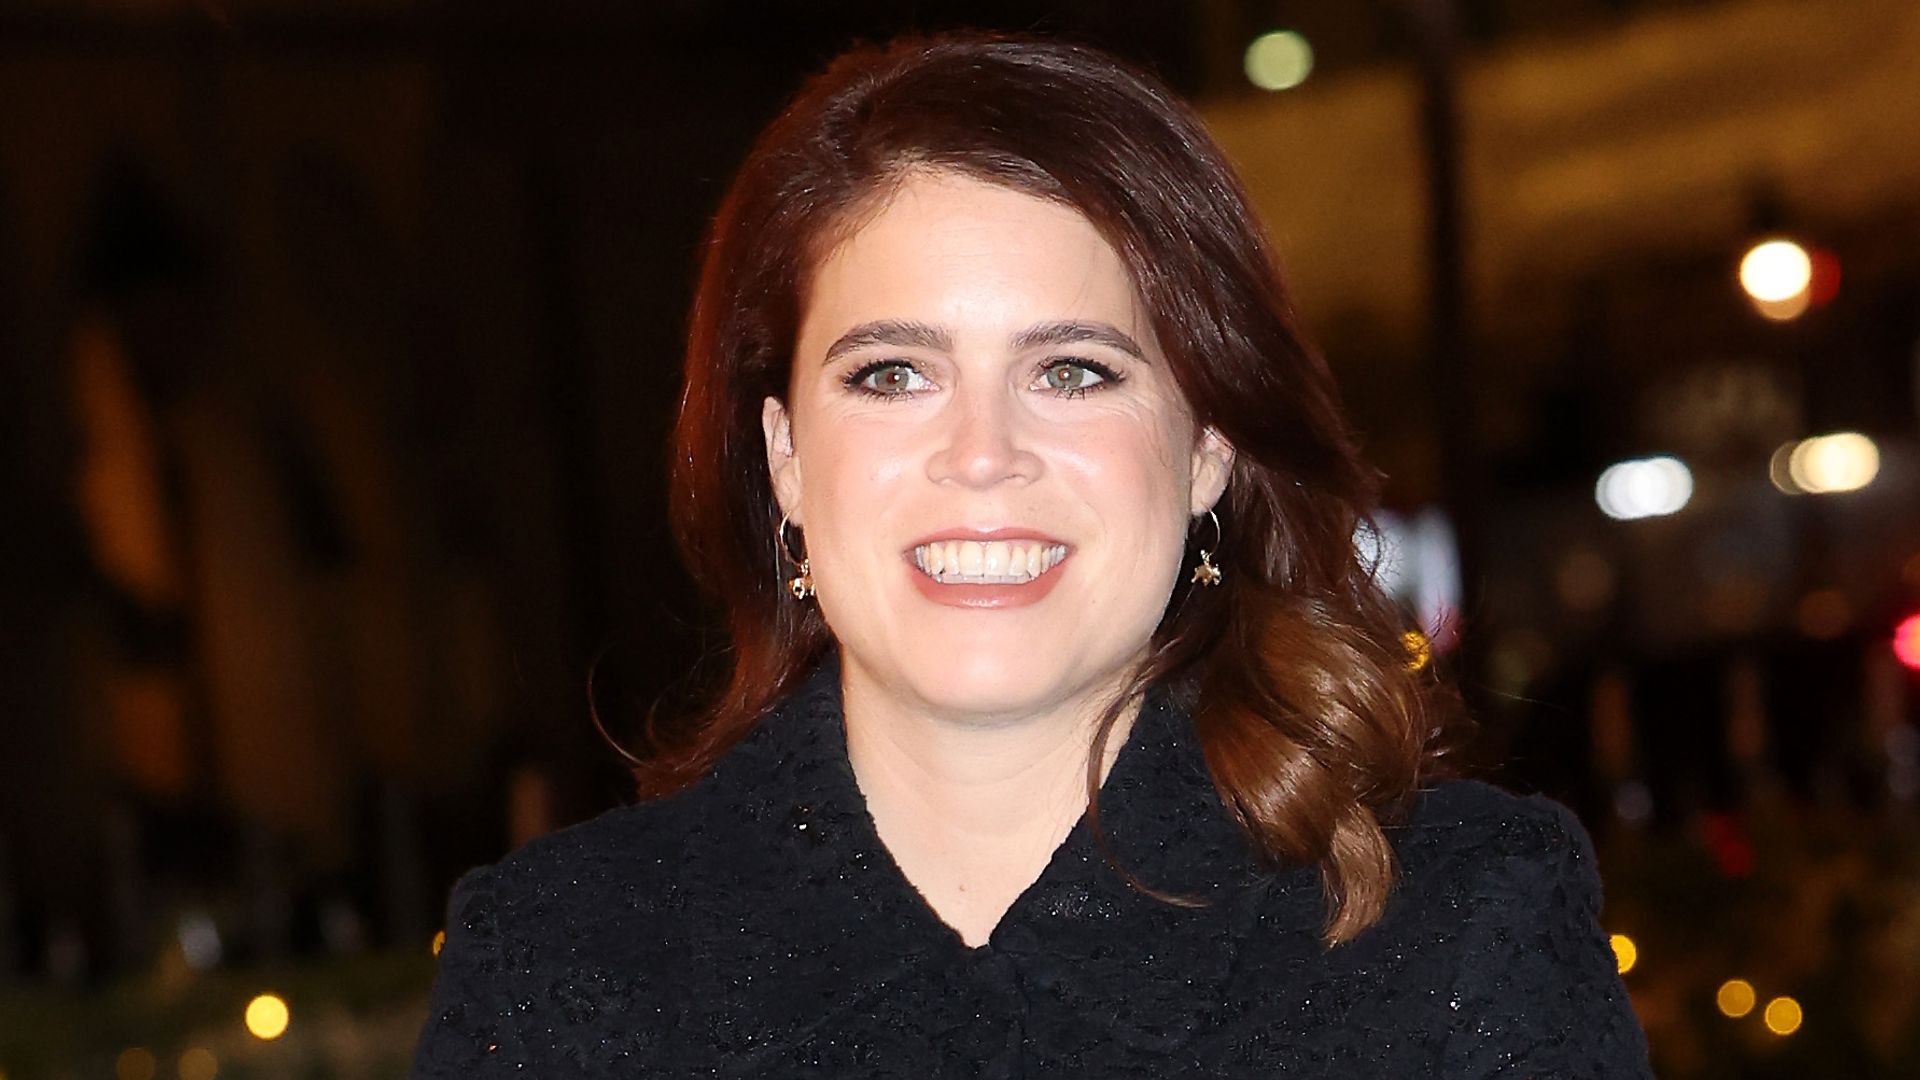 Princess Eugenie in black coat-dress and leather boots